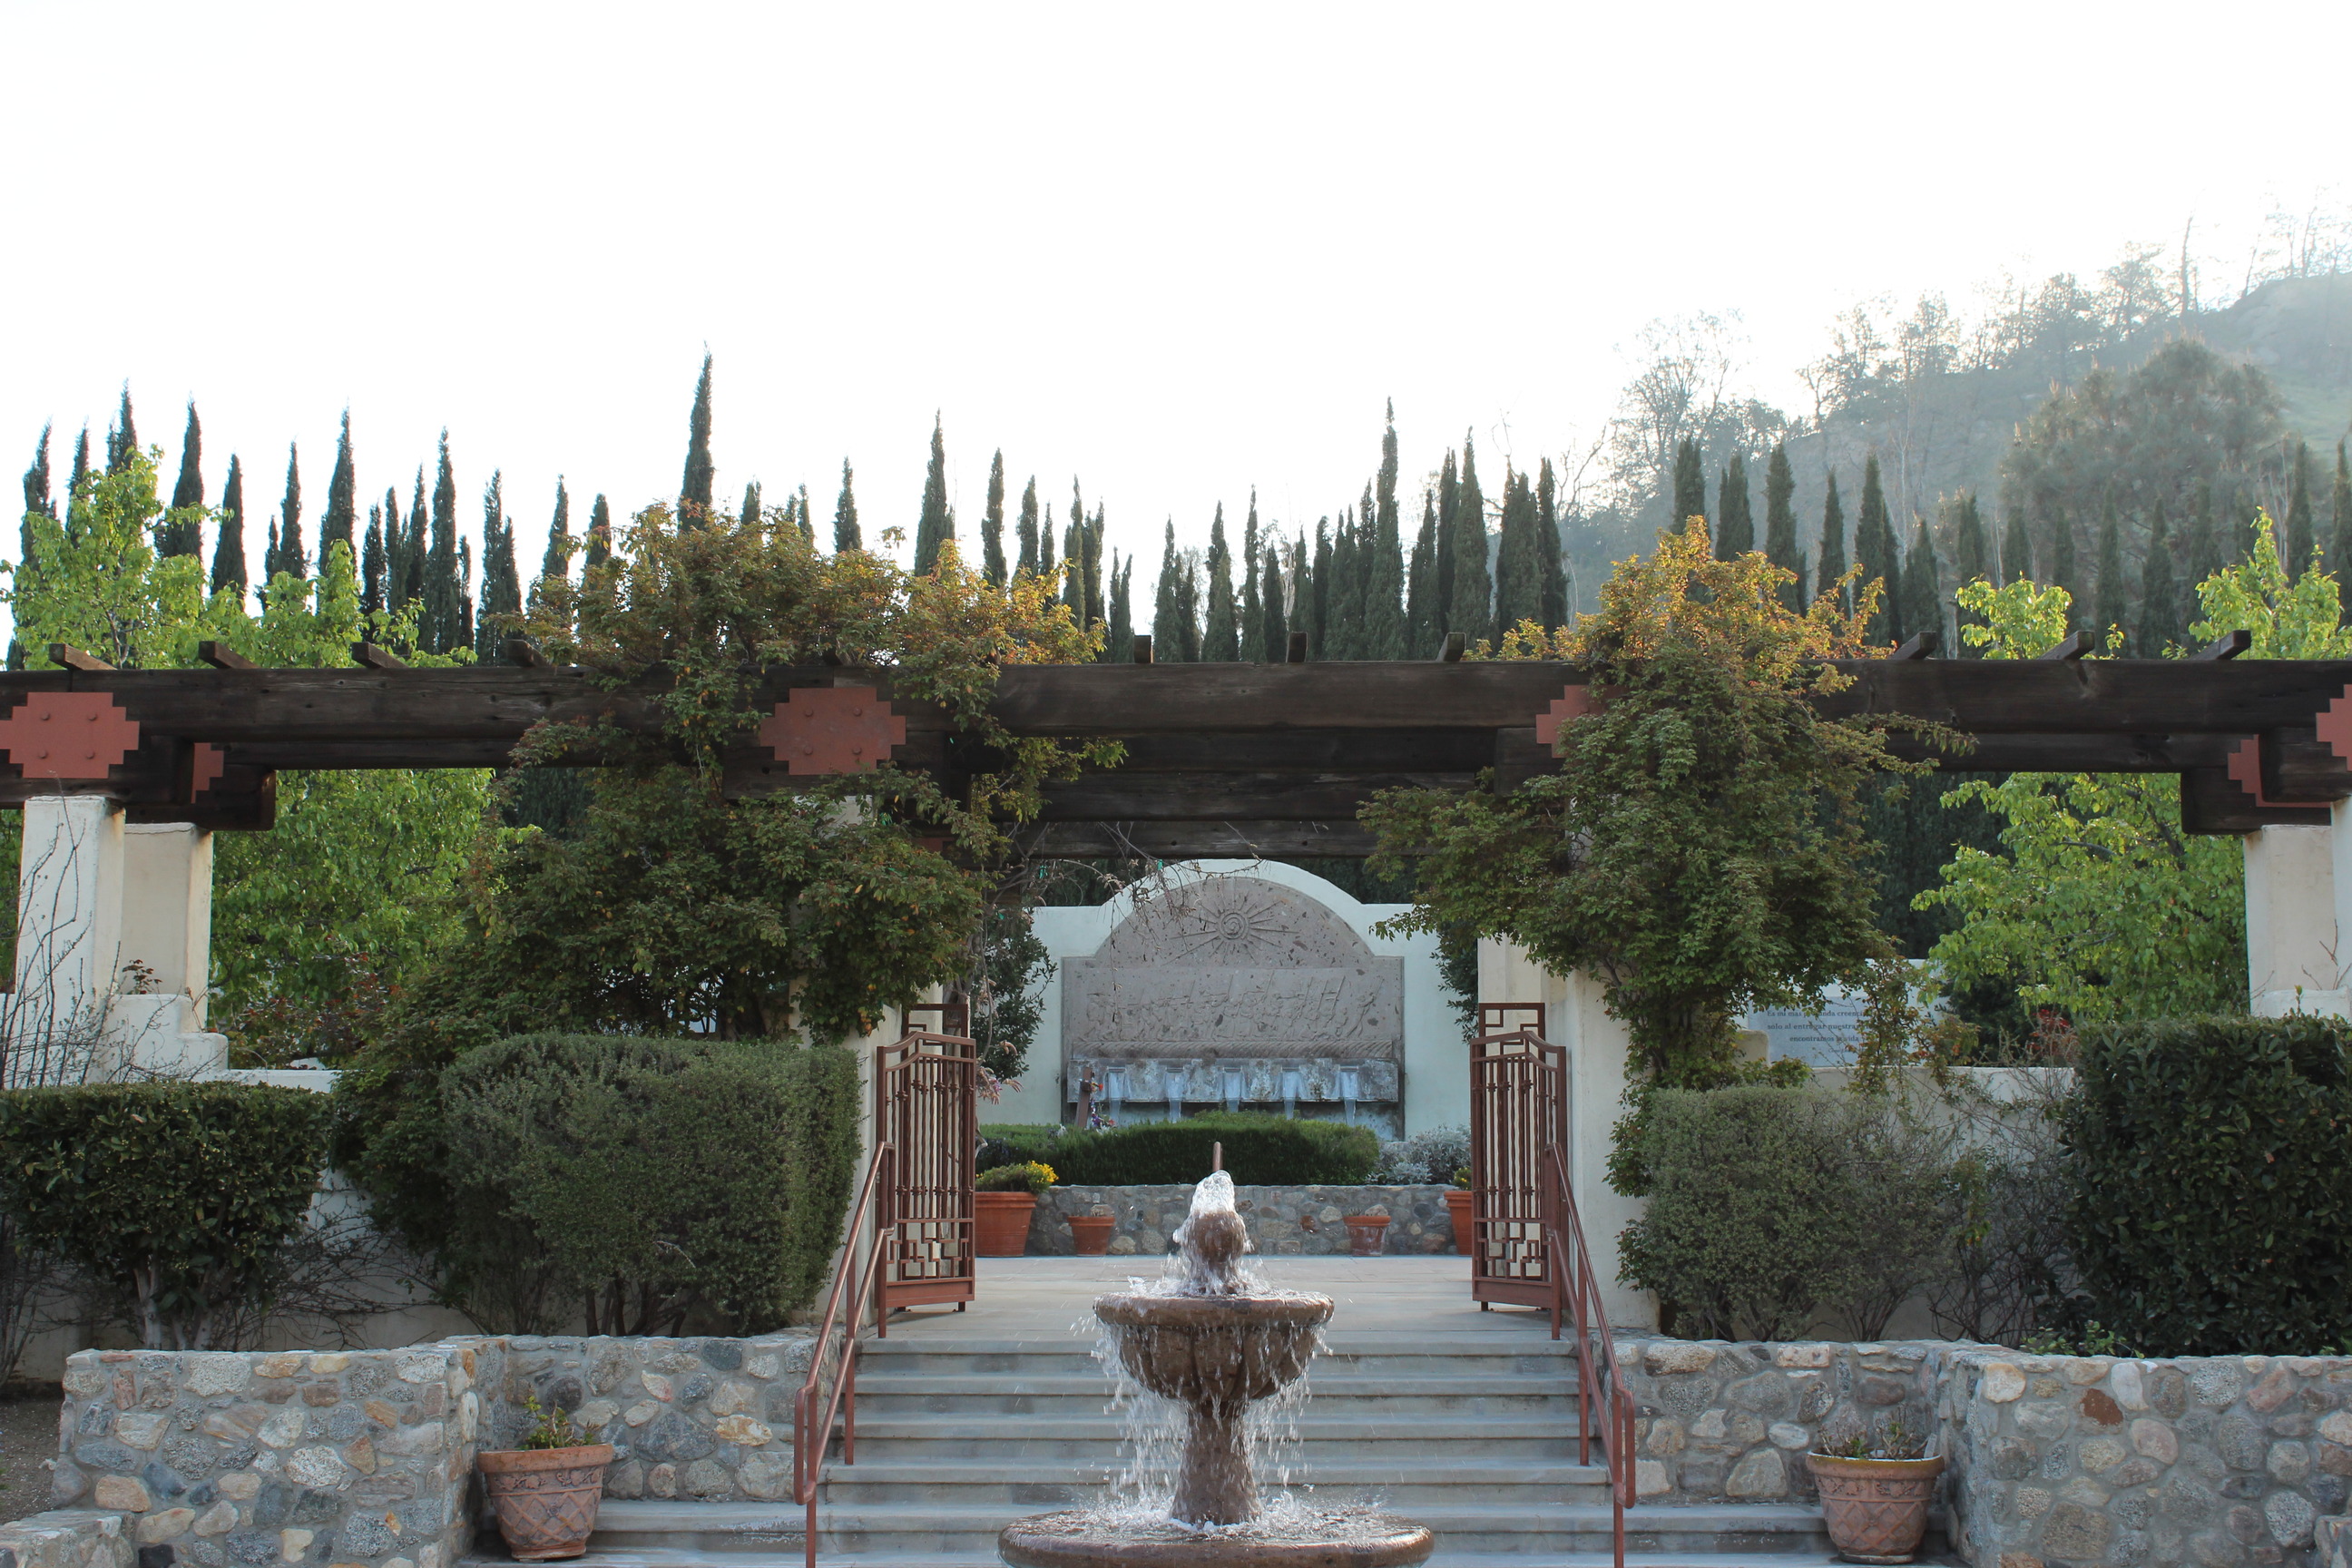 A fountain flows in front of a set of stairs that lead to a path that passes below a wooden arbor. In the background is a rectangular fountain with an arched top.